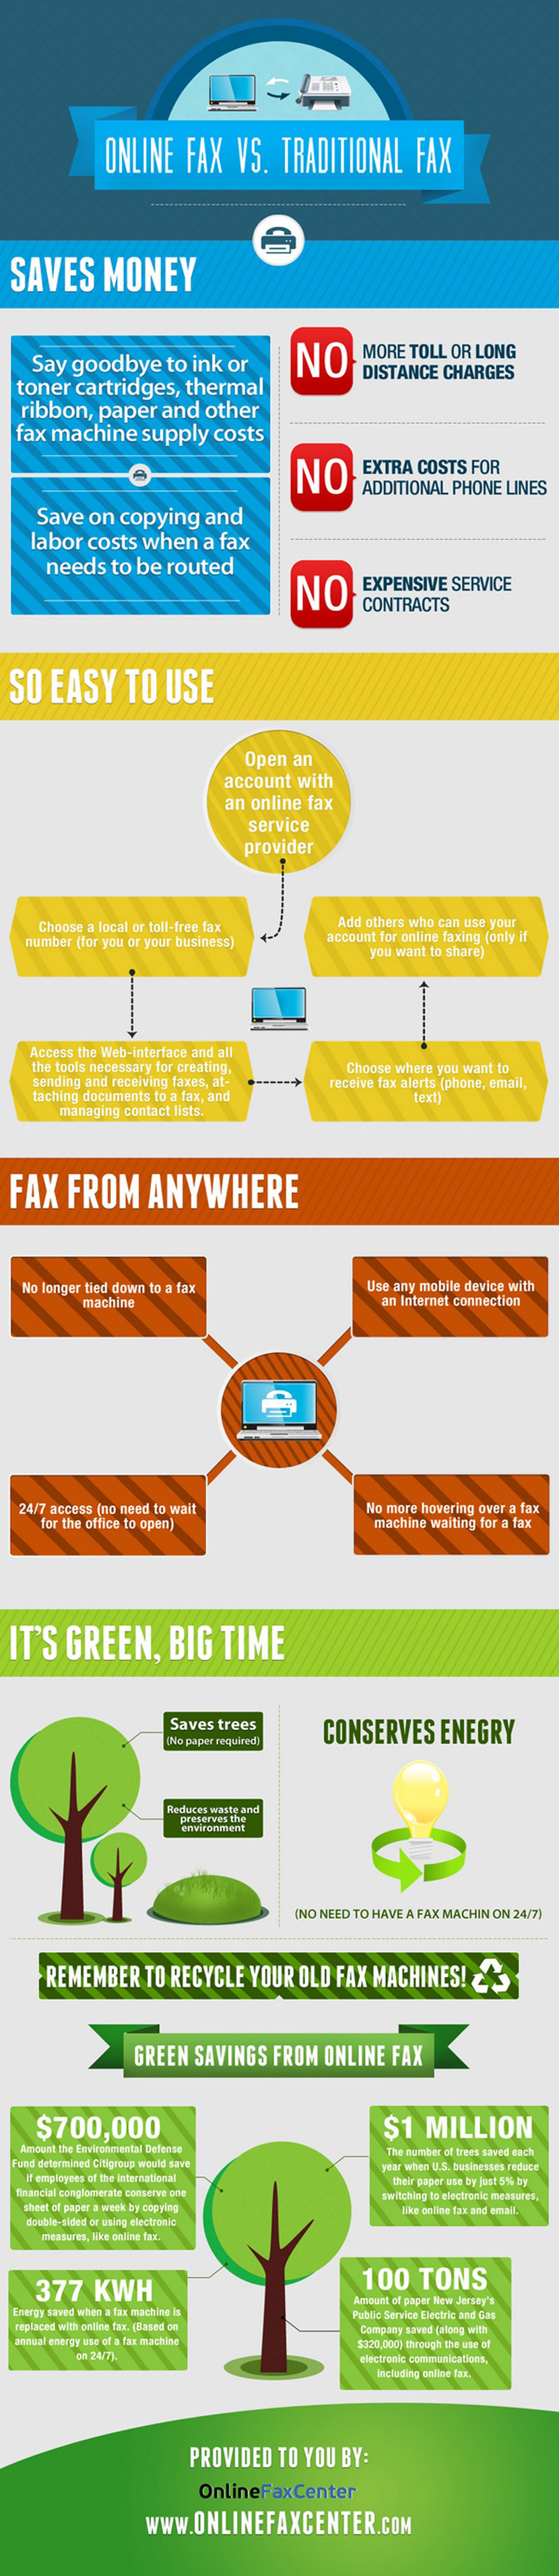 Online Faxing vs Traditional Paper Faxing microsoft fax windows 7 microsoft fax number